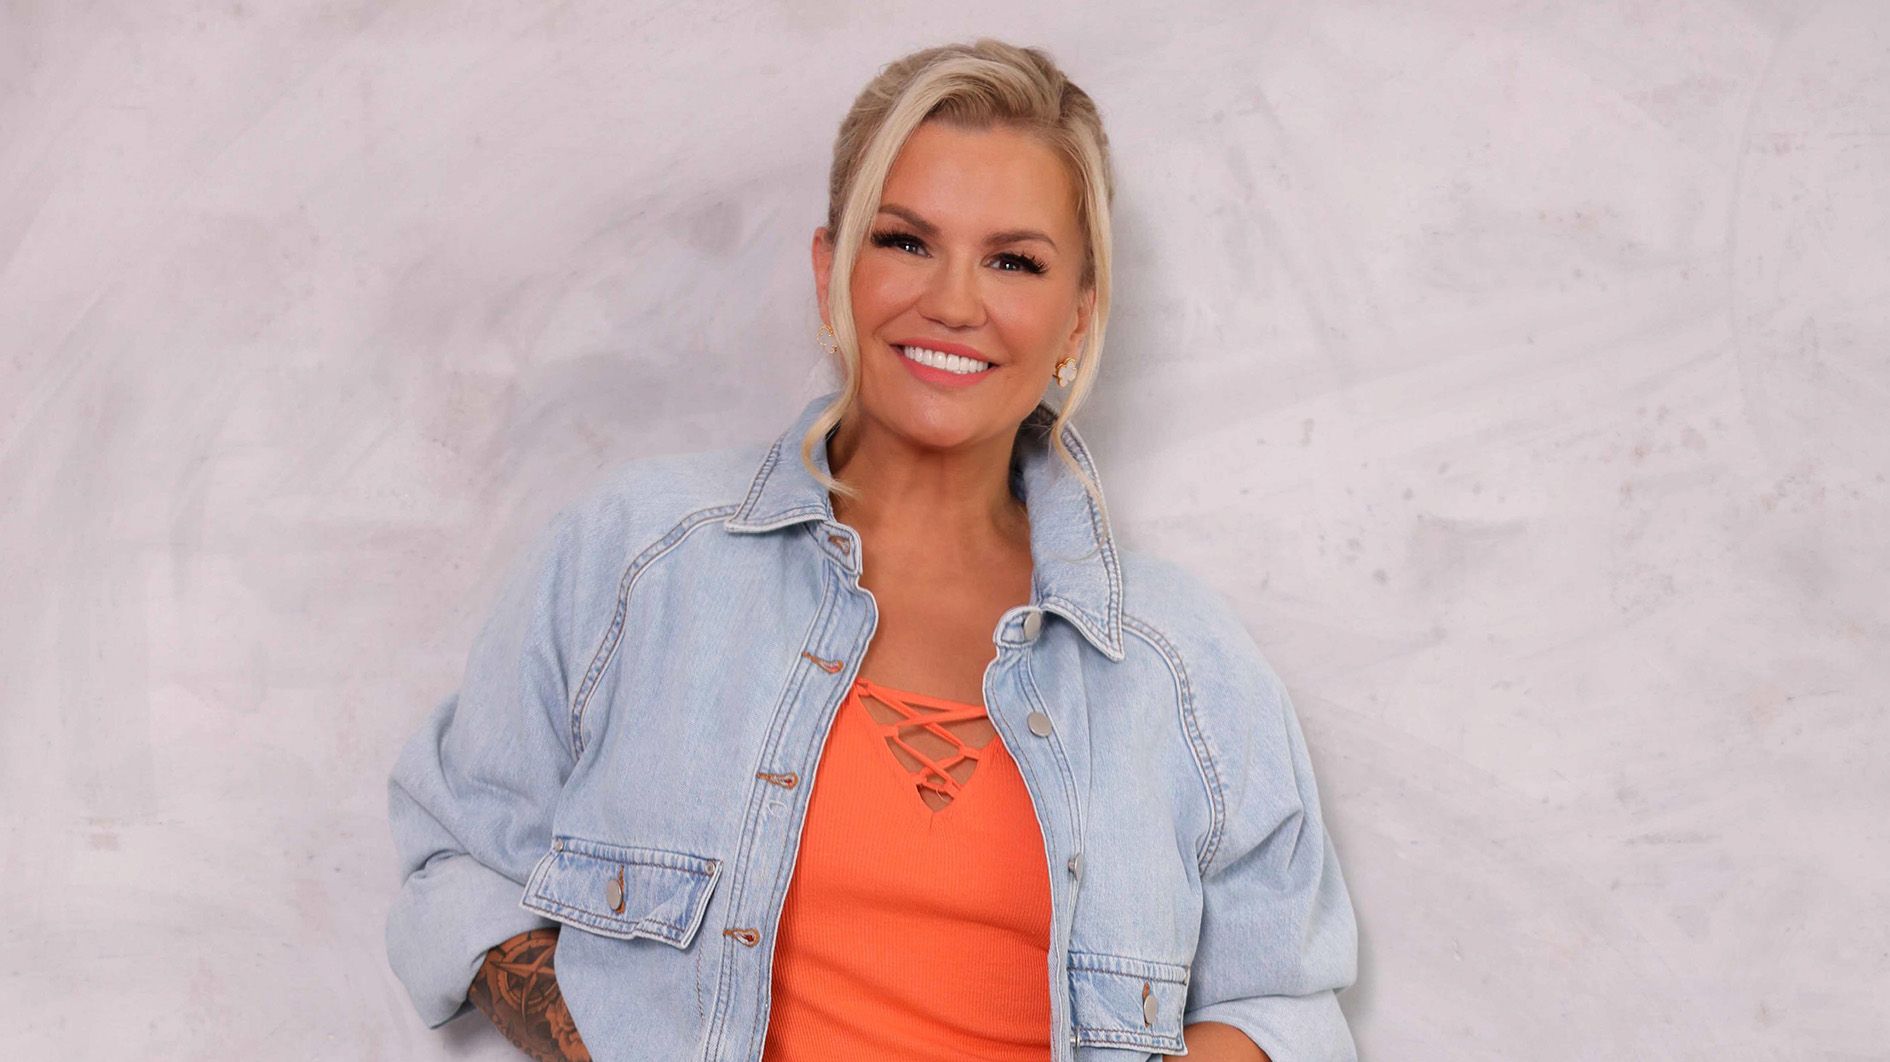 Kerry Katona jokes she's part of the 'itty bitty t***y club' after